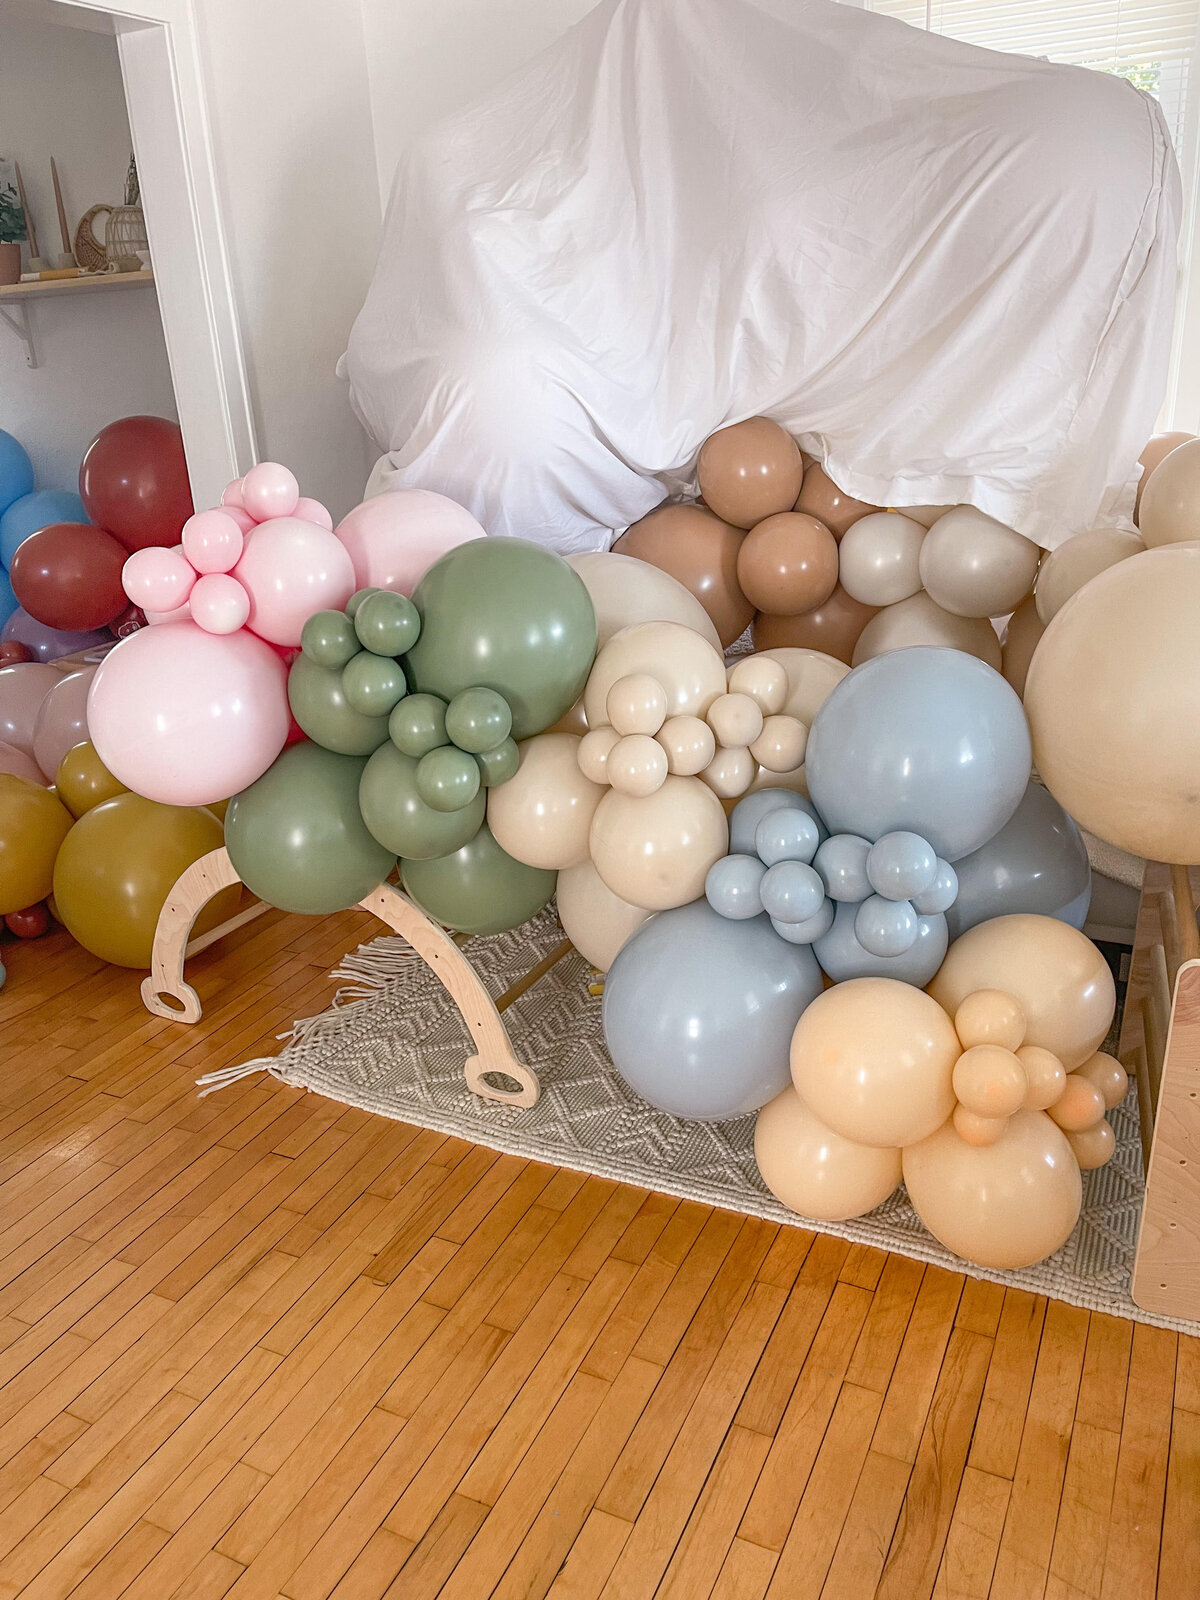 Various color and different size balloons tied together.